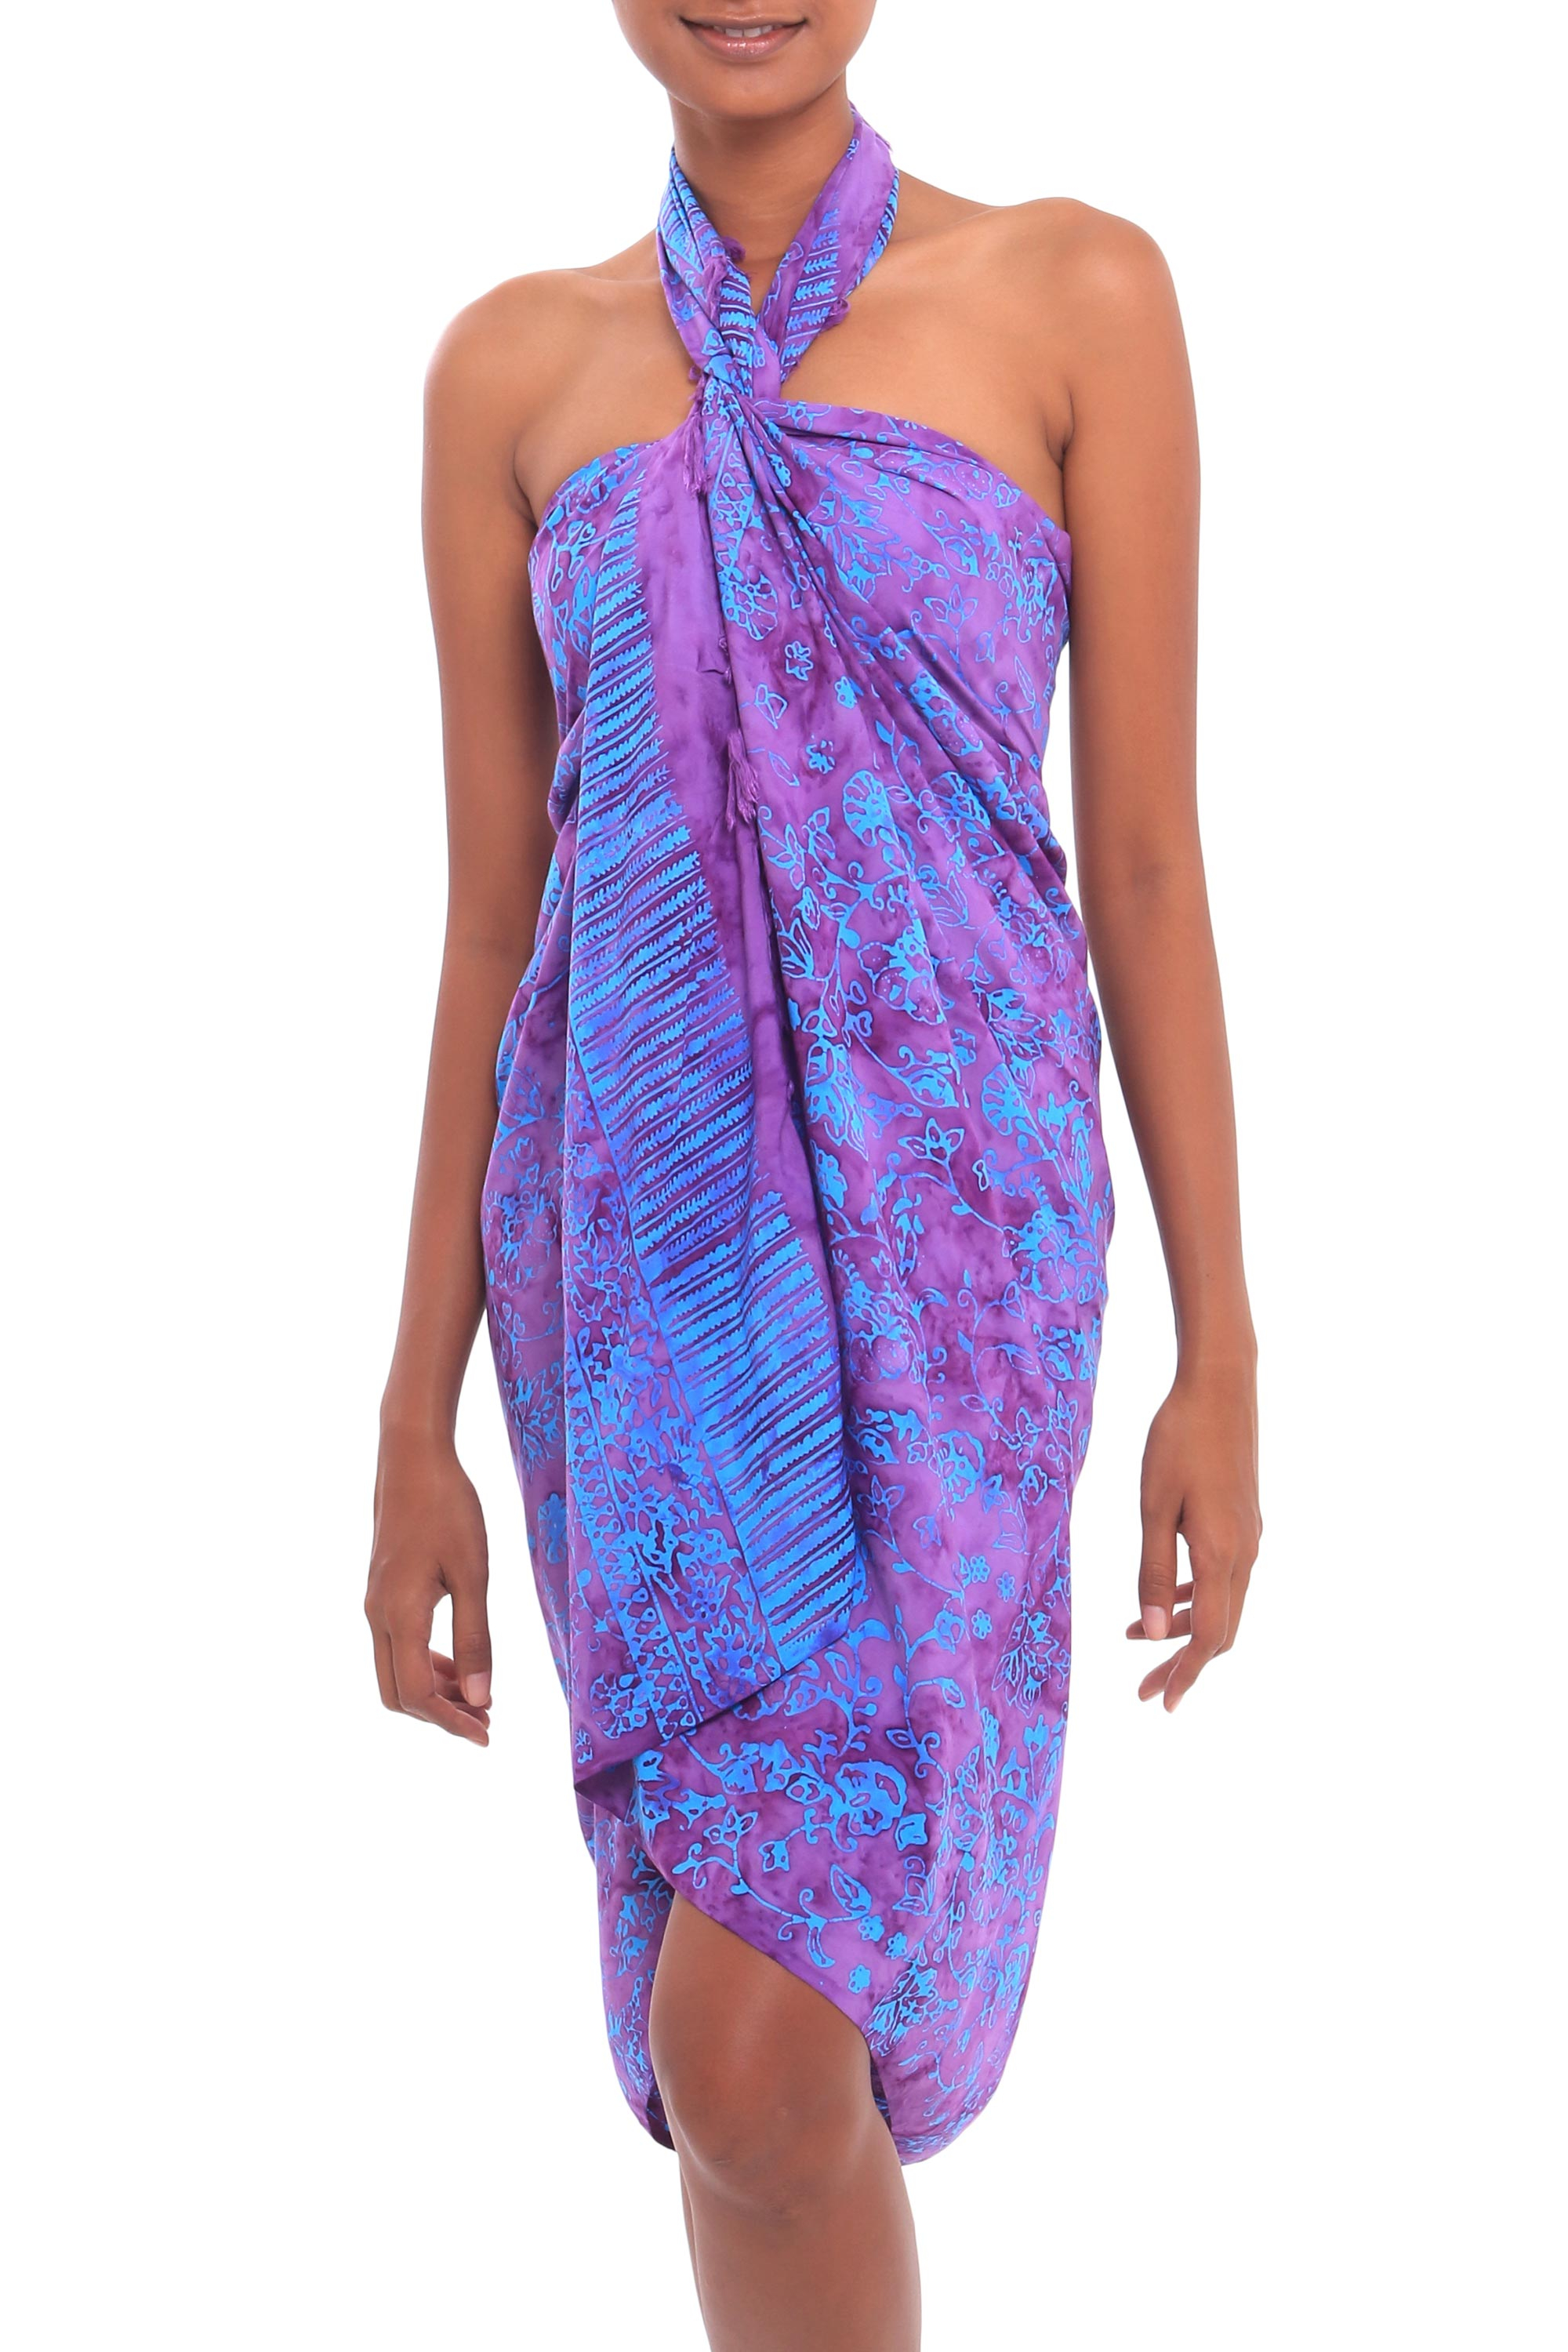 Floral Batik Rayon Sarong in Wisteria from Bali - Mystifying Forest ...